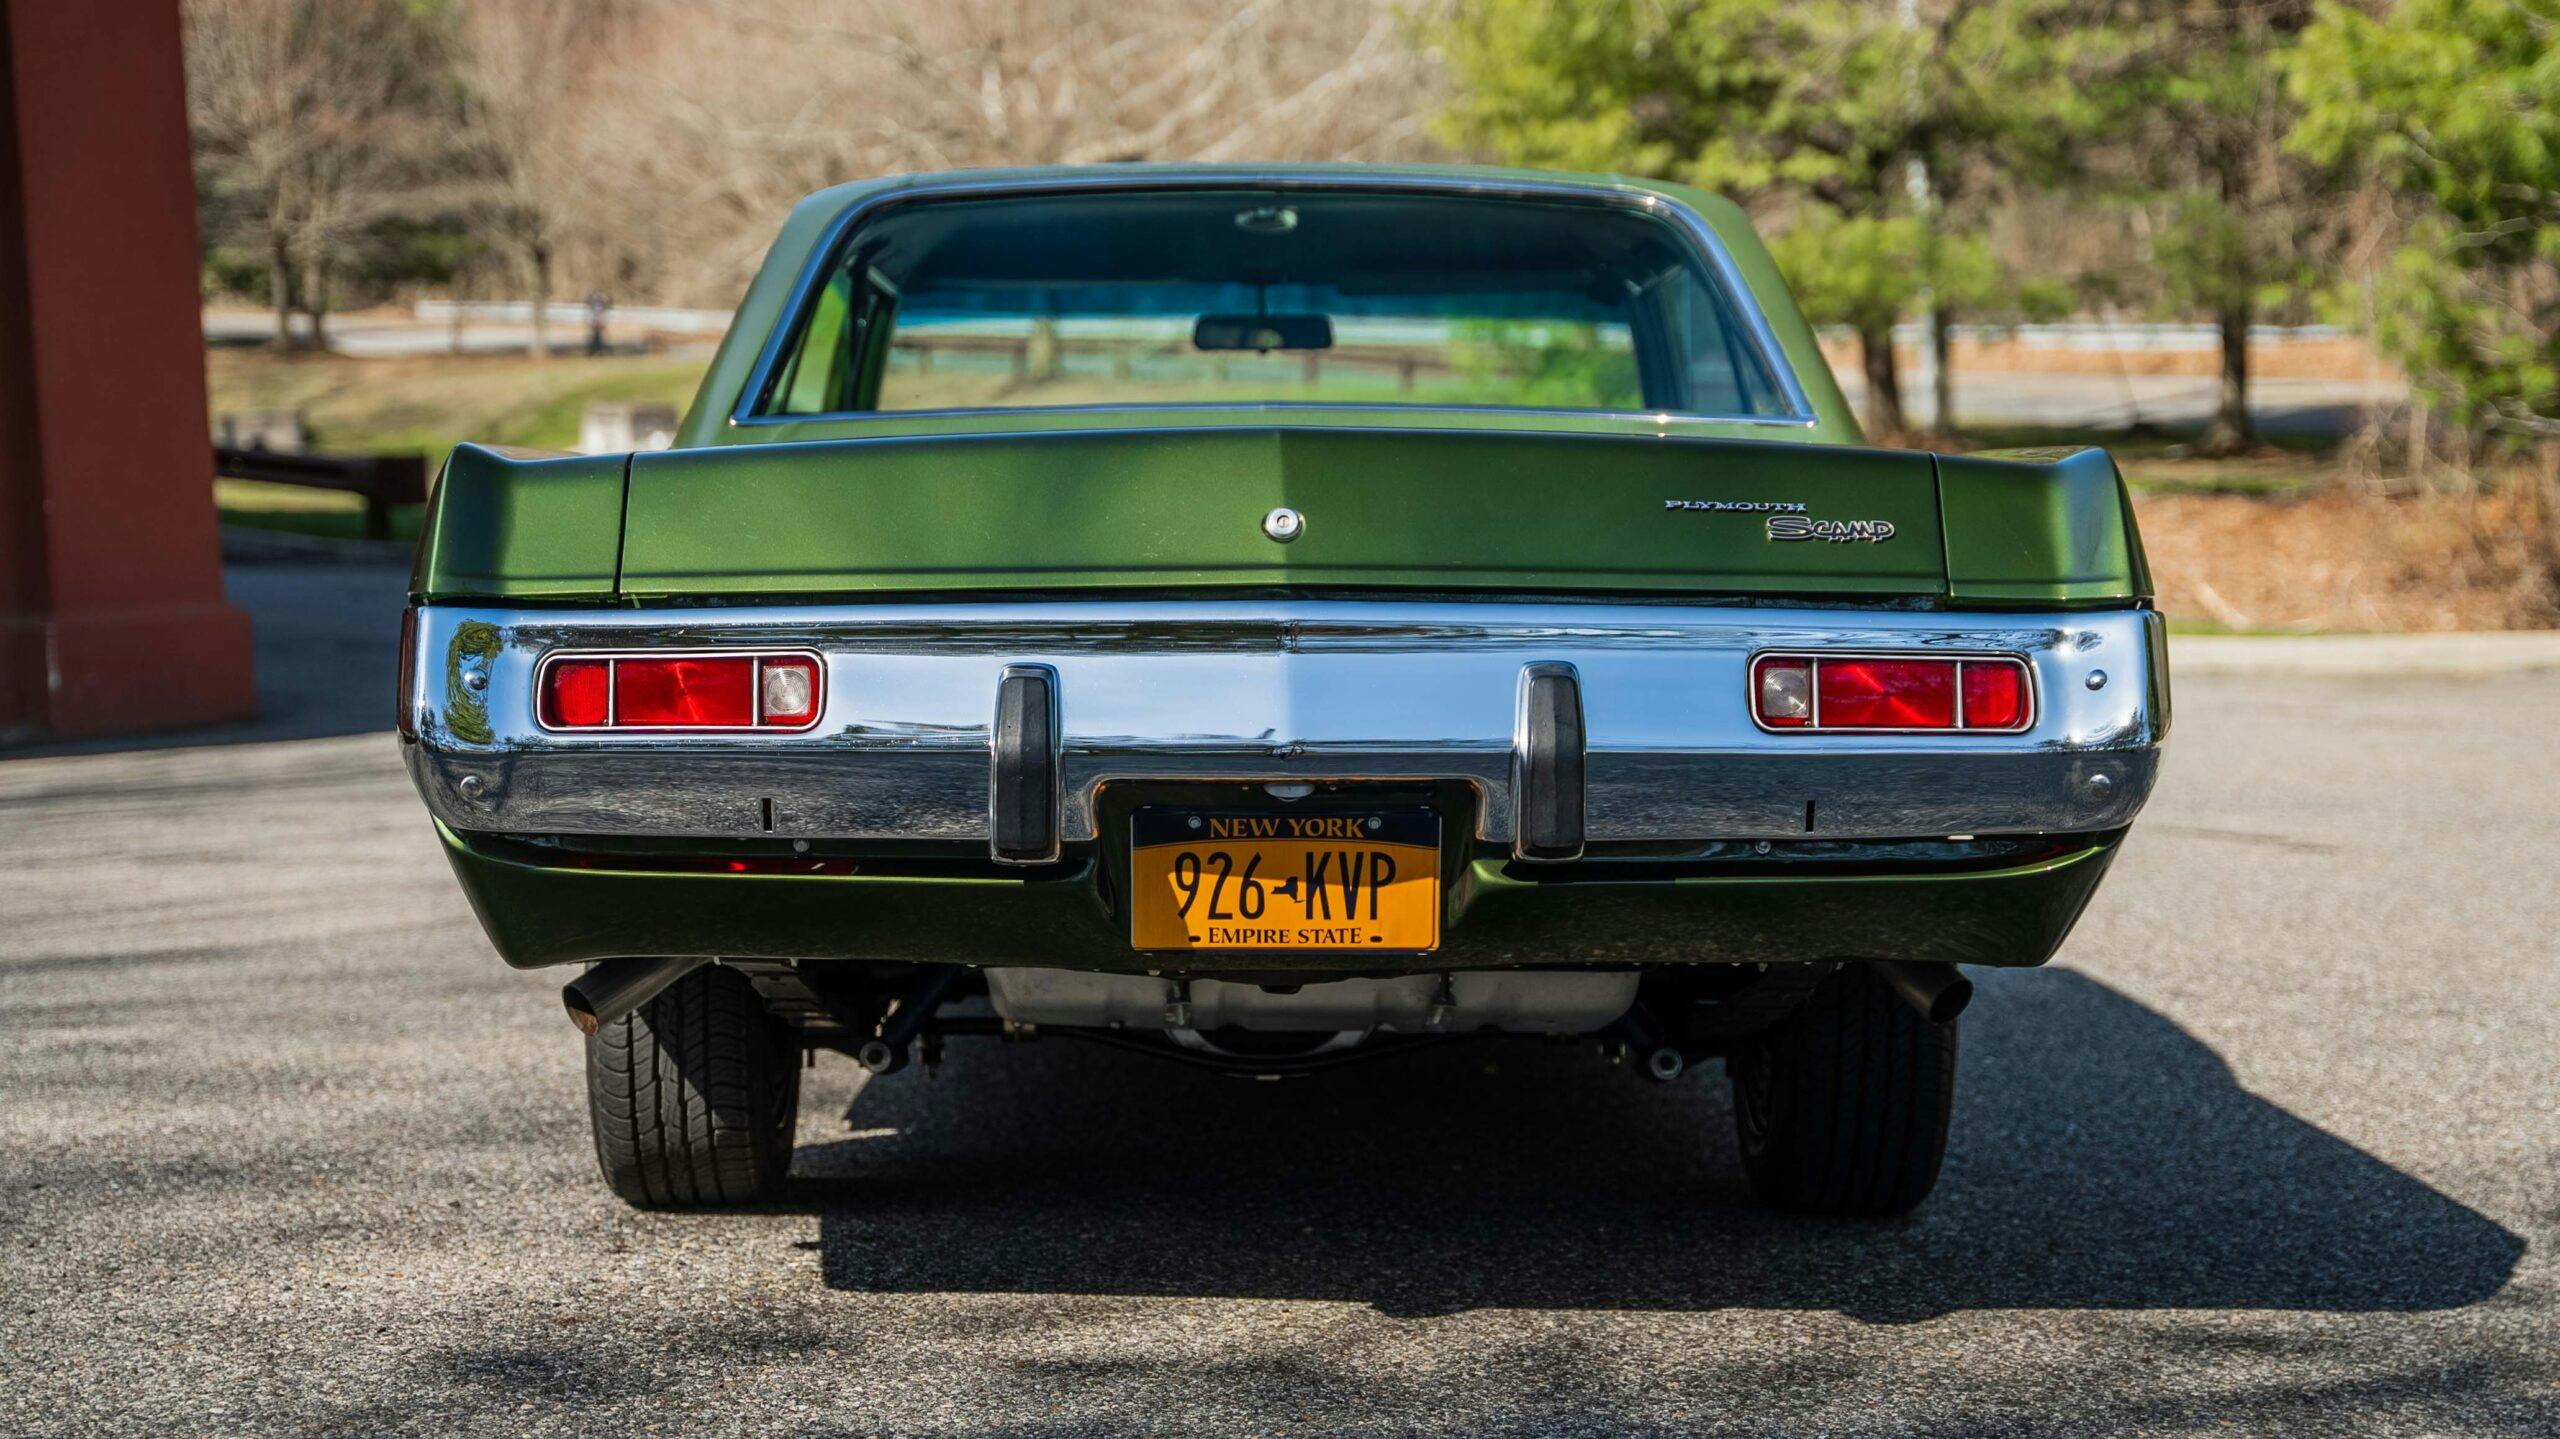 1973 Plymouth Scamp rear